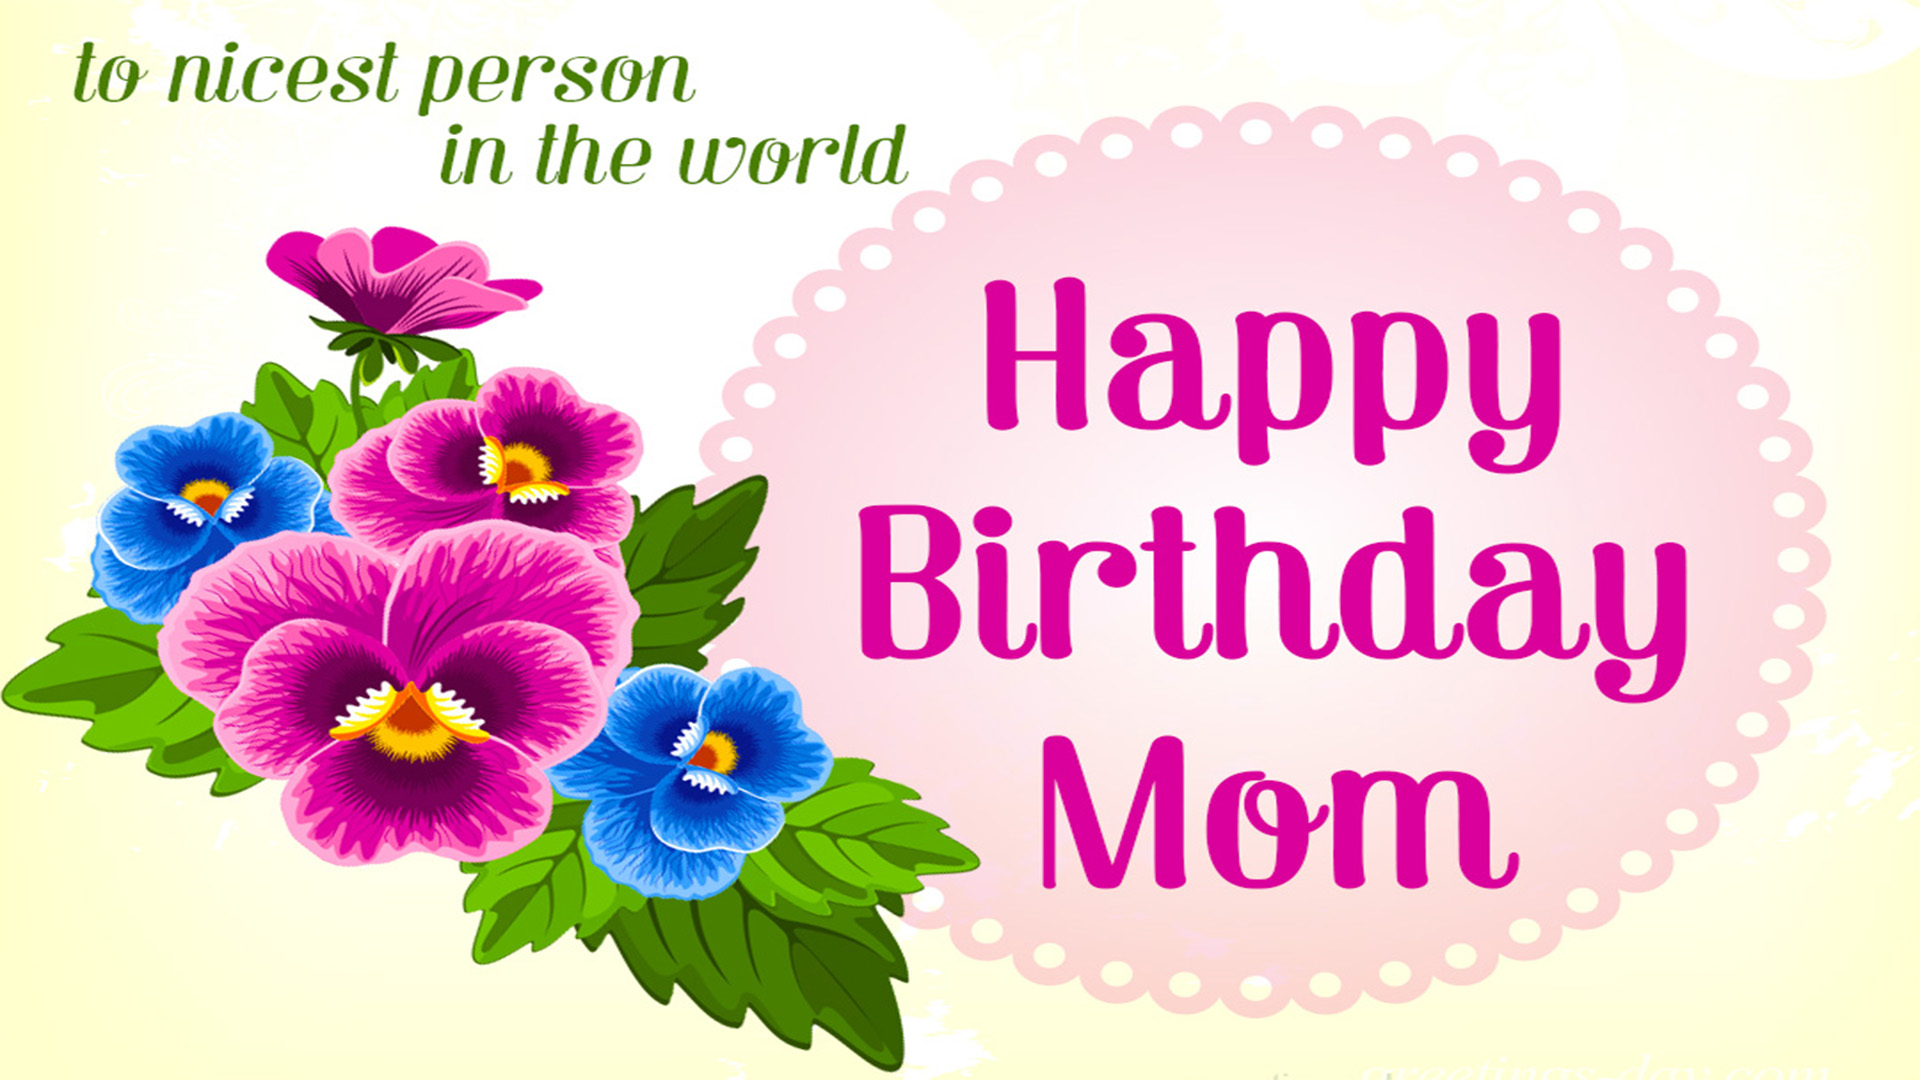 Happy Birthday Mom HD Images Birthday Wishes for Mother.